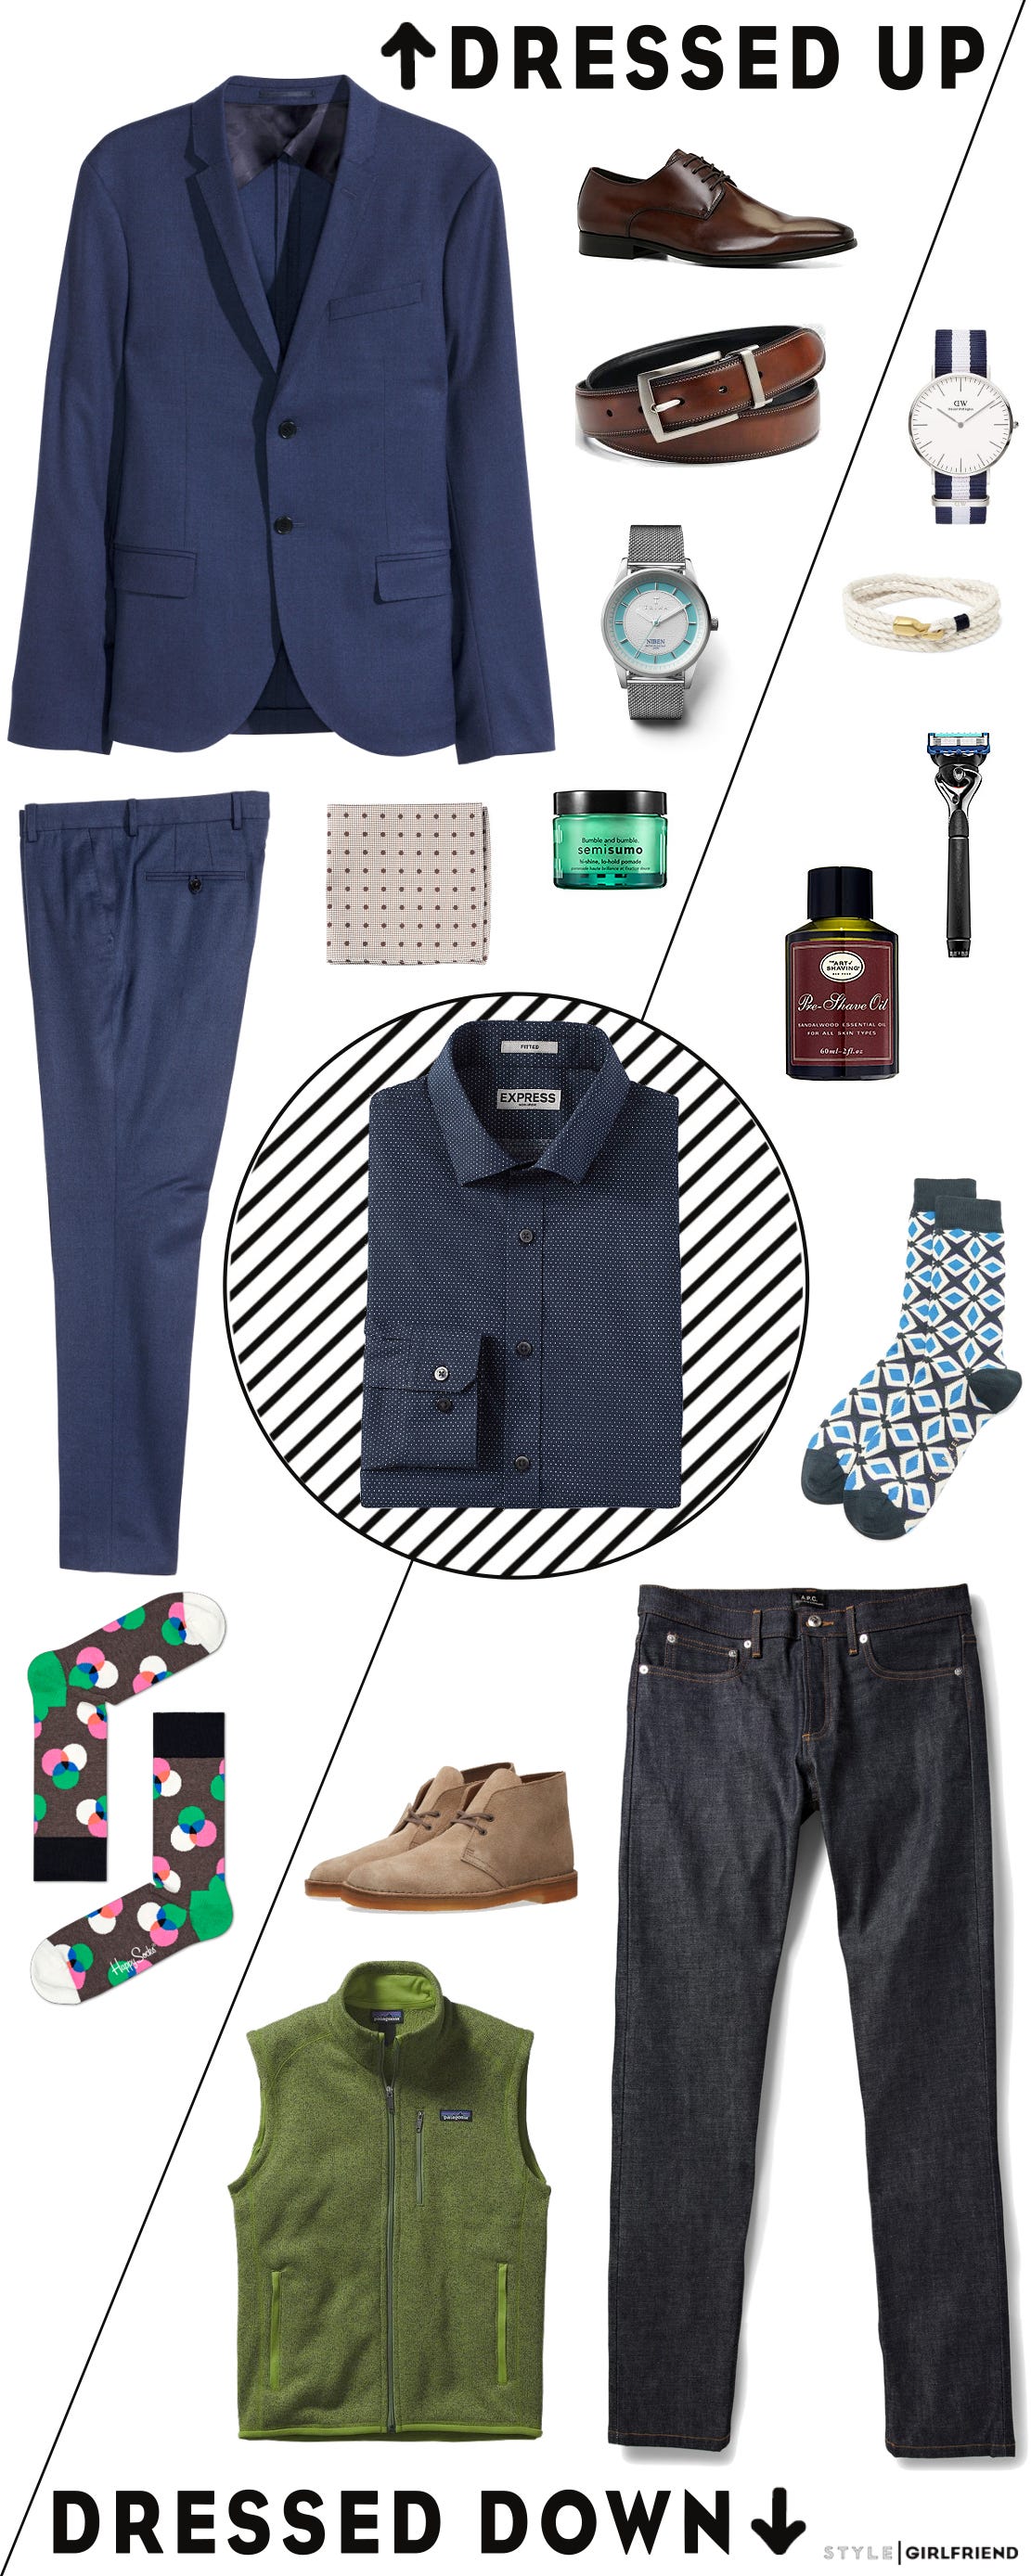 How to Wear... A Blue Patterned Shirt